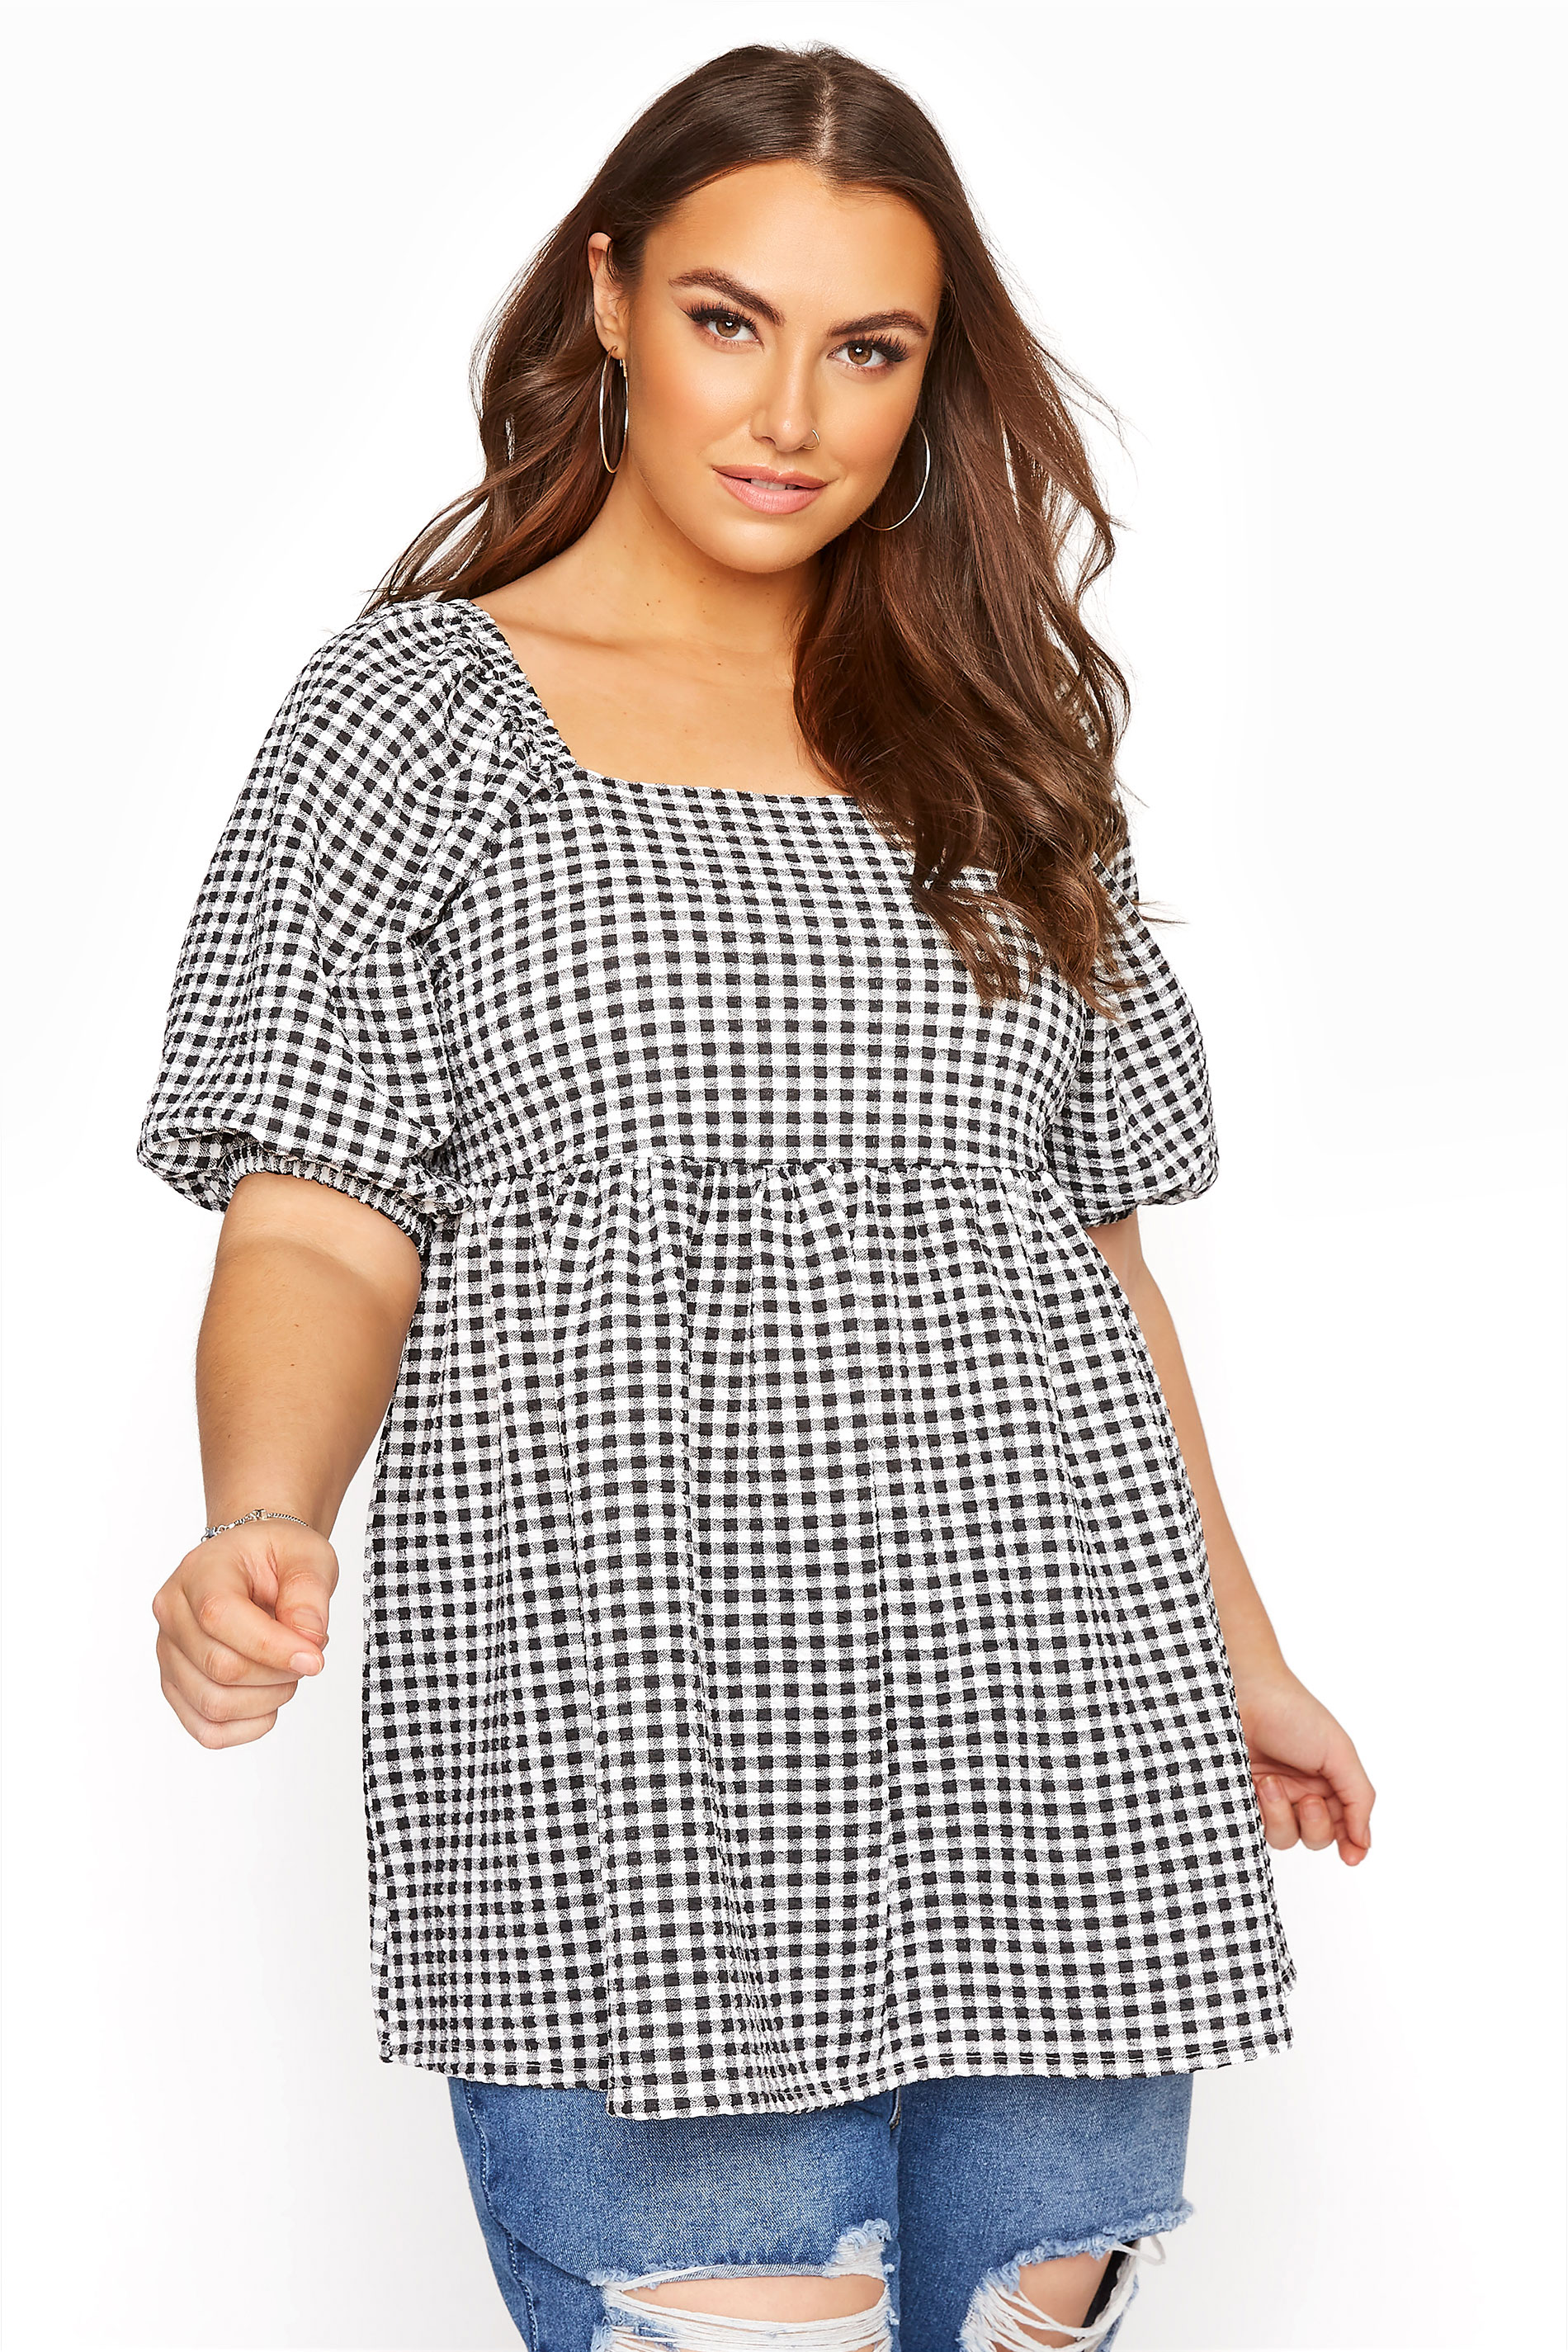 LIMITED COLLECTION Black Gingham Milkmaid Top | Yours Clothing